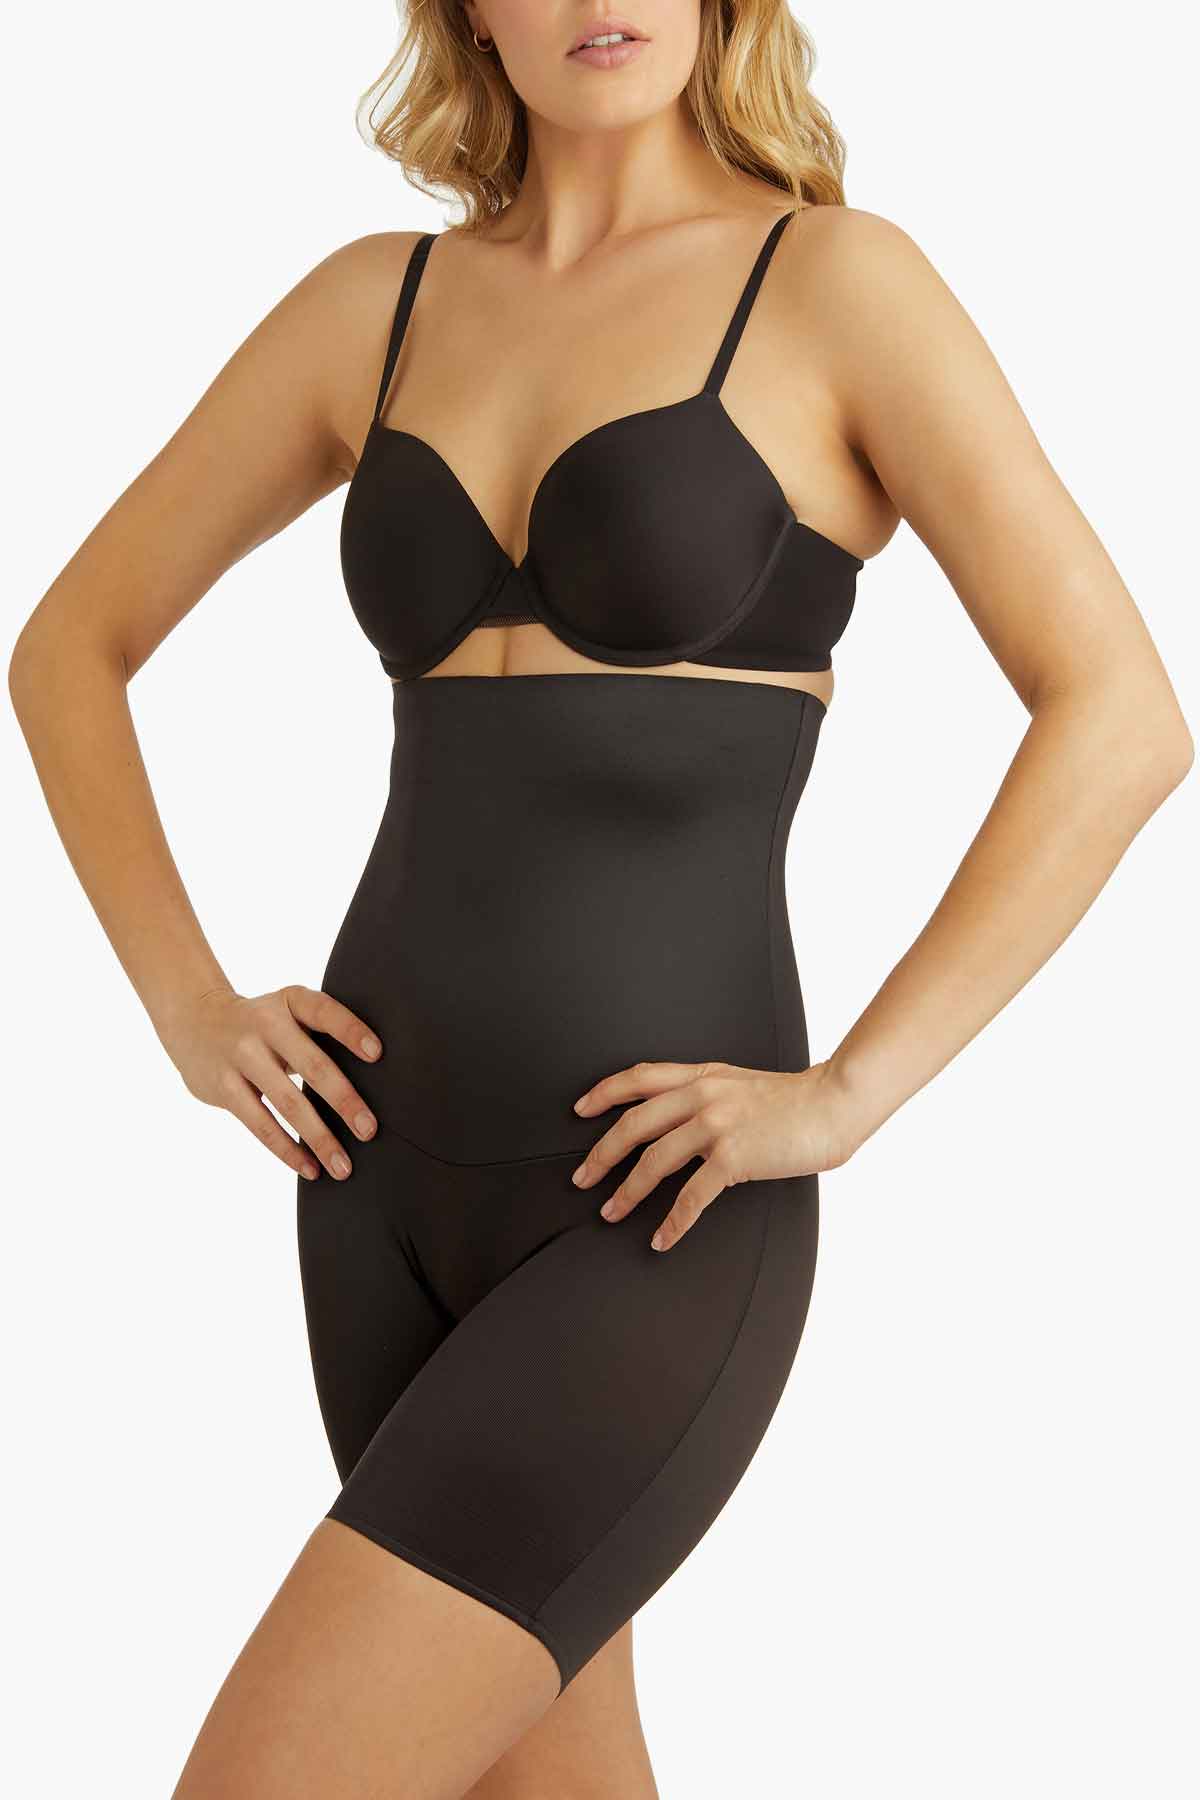 Slim Shaper By Miracle Brands Extra Firm Control Zip Waist Cincher